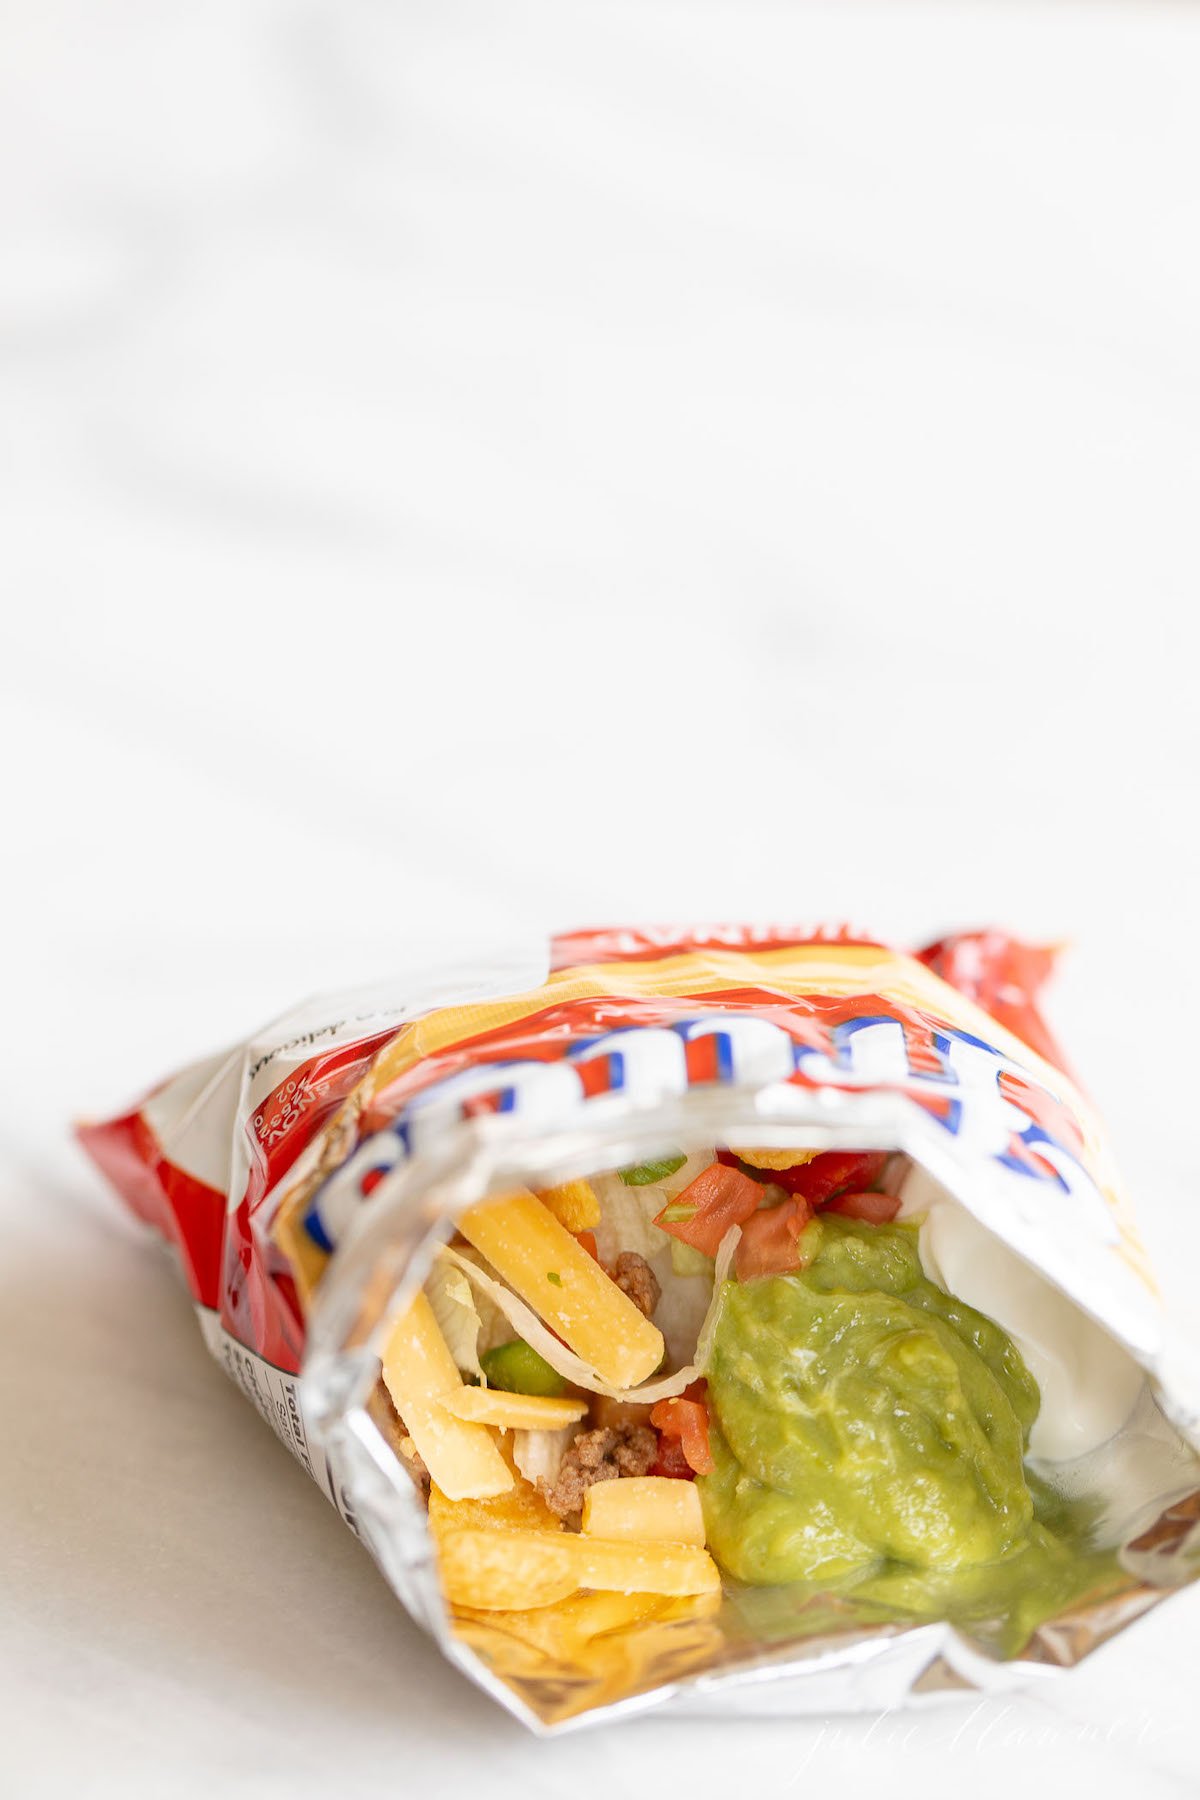 A bag of a walking tacos recipe with sour cream and guacamole.